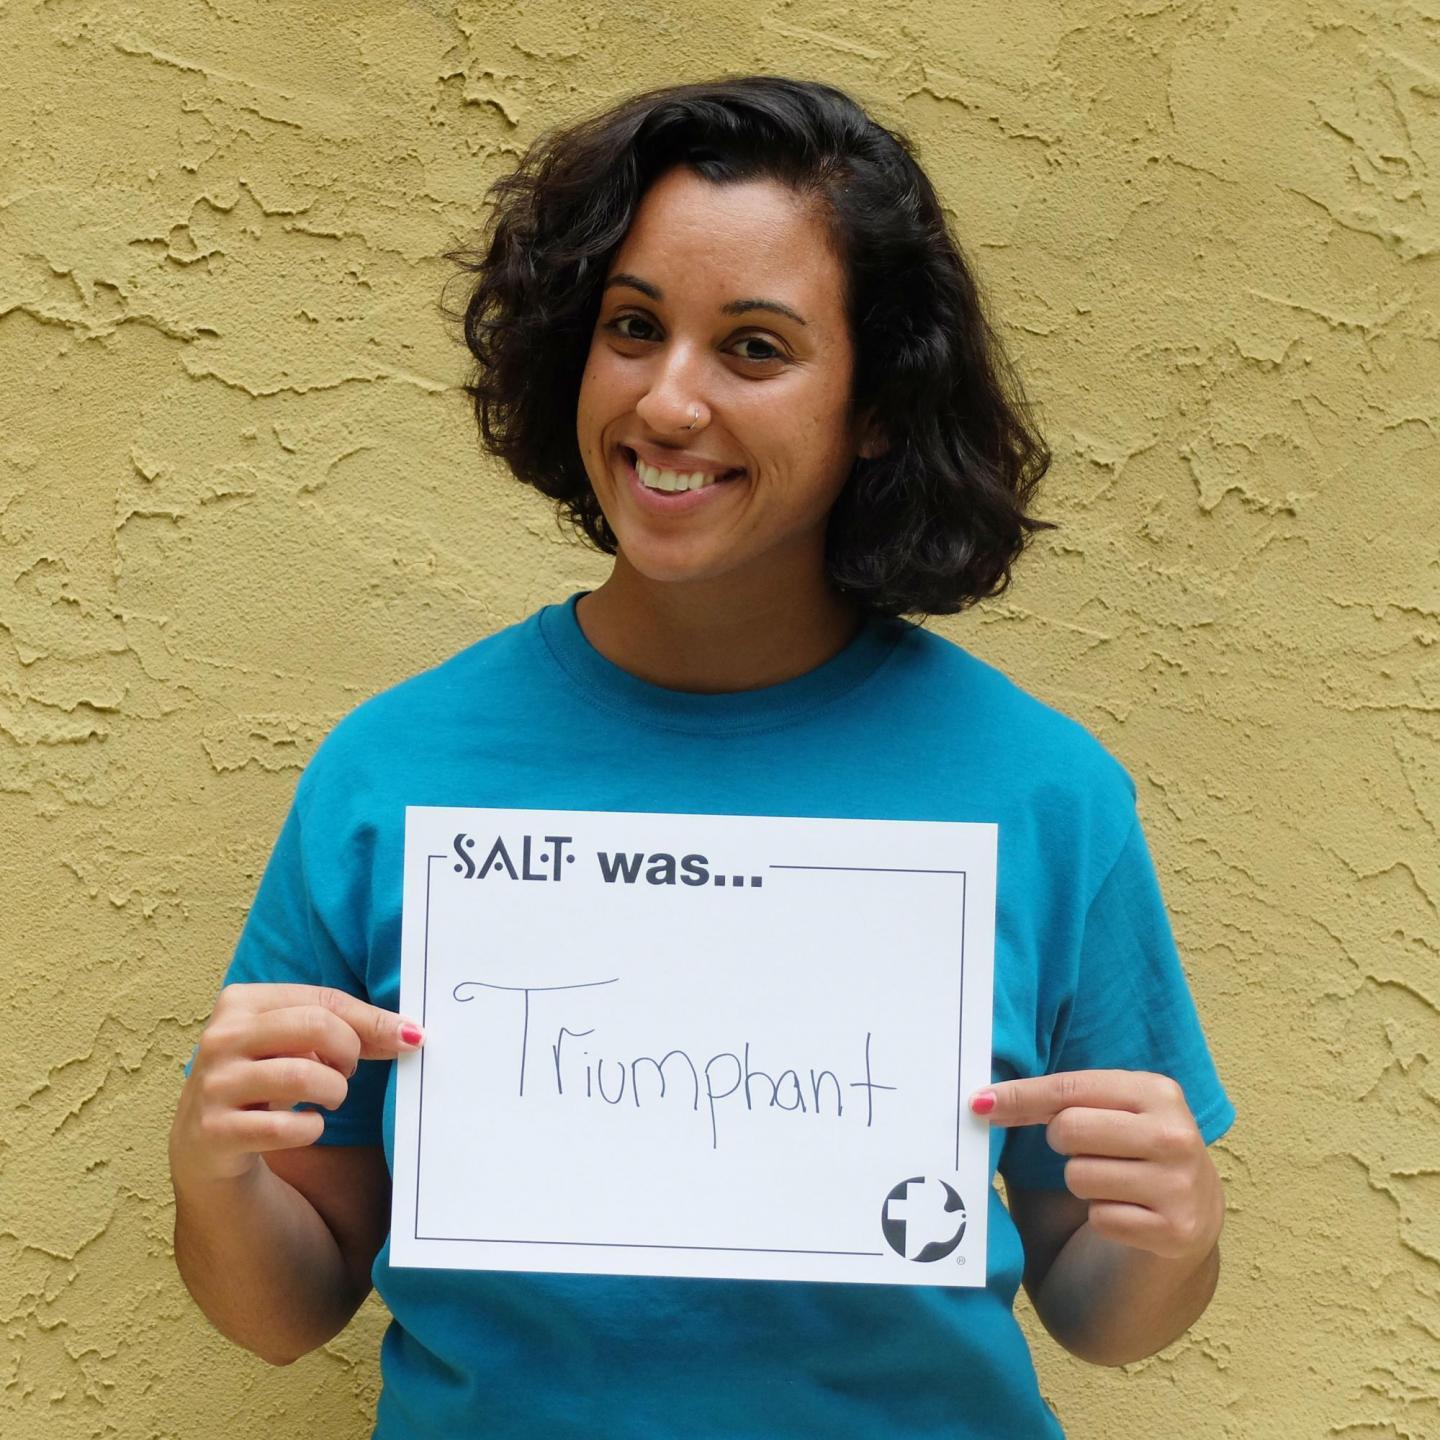 A young adult stands in front of a yellow wall and holds a sign that says, "SALT was an Triumphant"